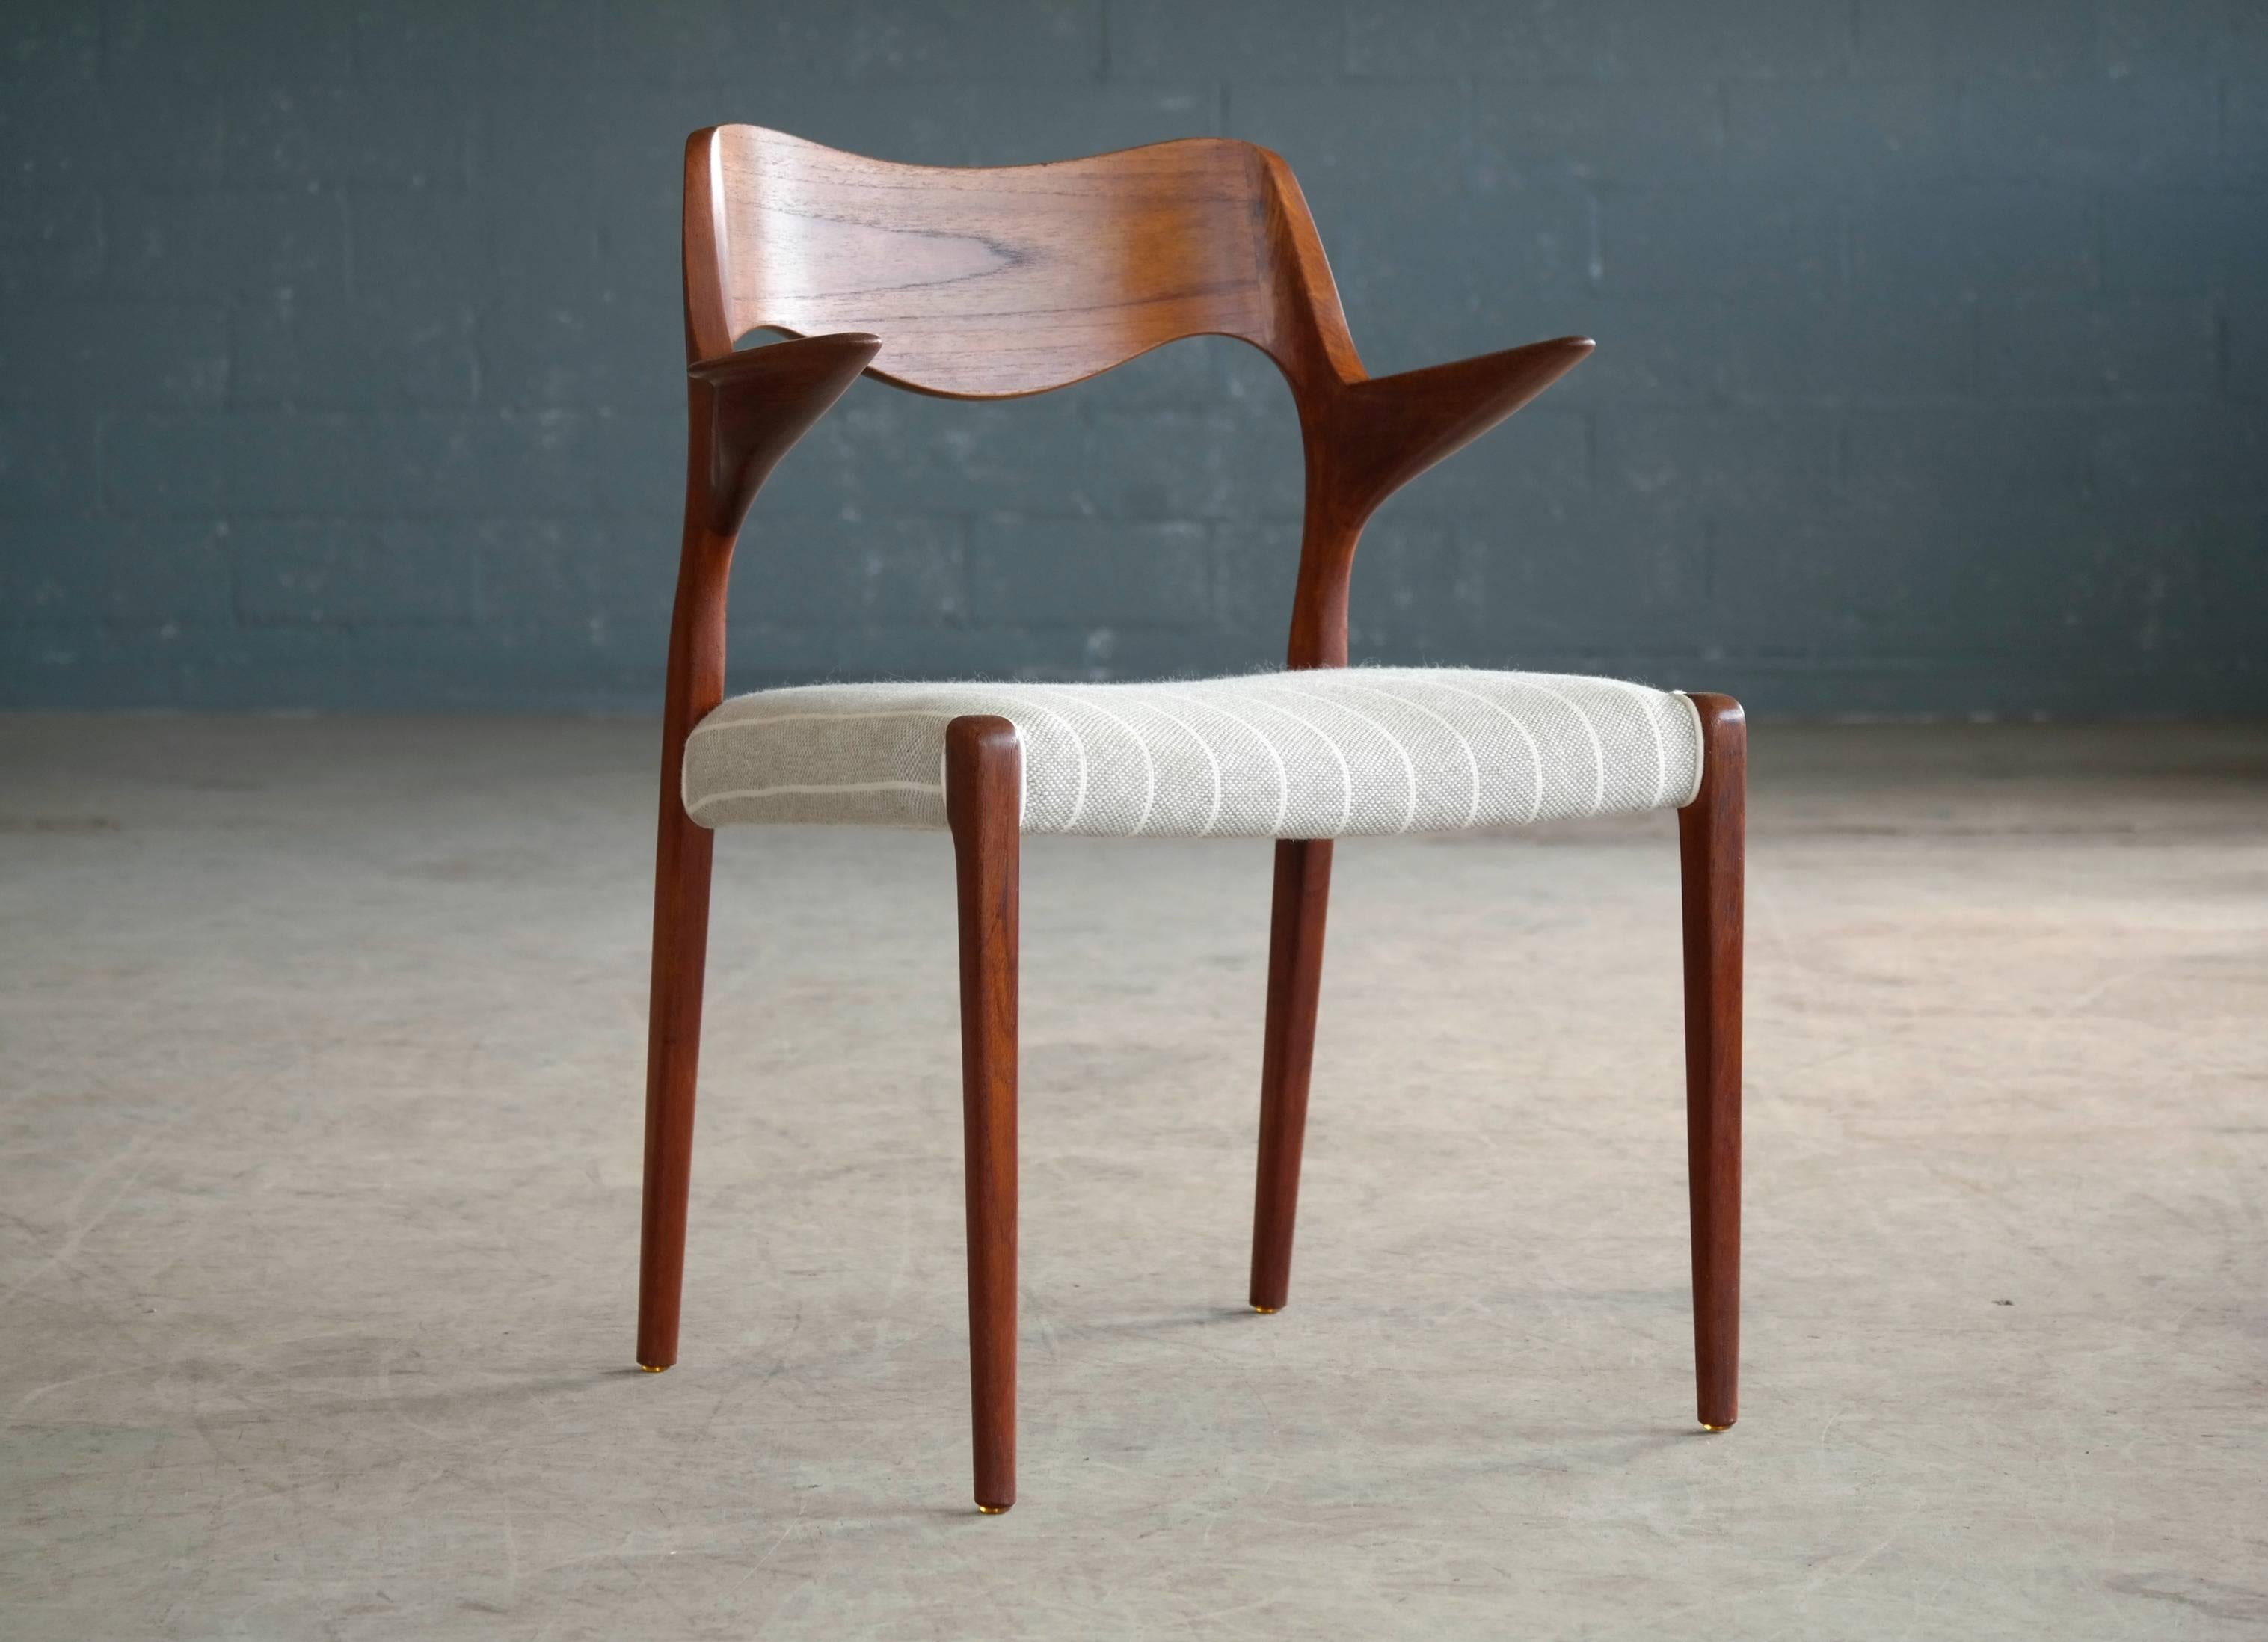 This wonderful Danish modern teak armchair by NO Moller was designed in 1955 for J.L. Møllers Møbelfabrik. Beautiful versatile chair that works equally well as a work chair with your desk or at the helm of the dining table. Beautiful hand-carved